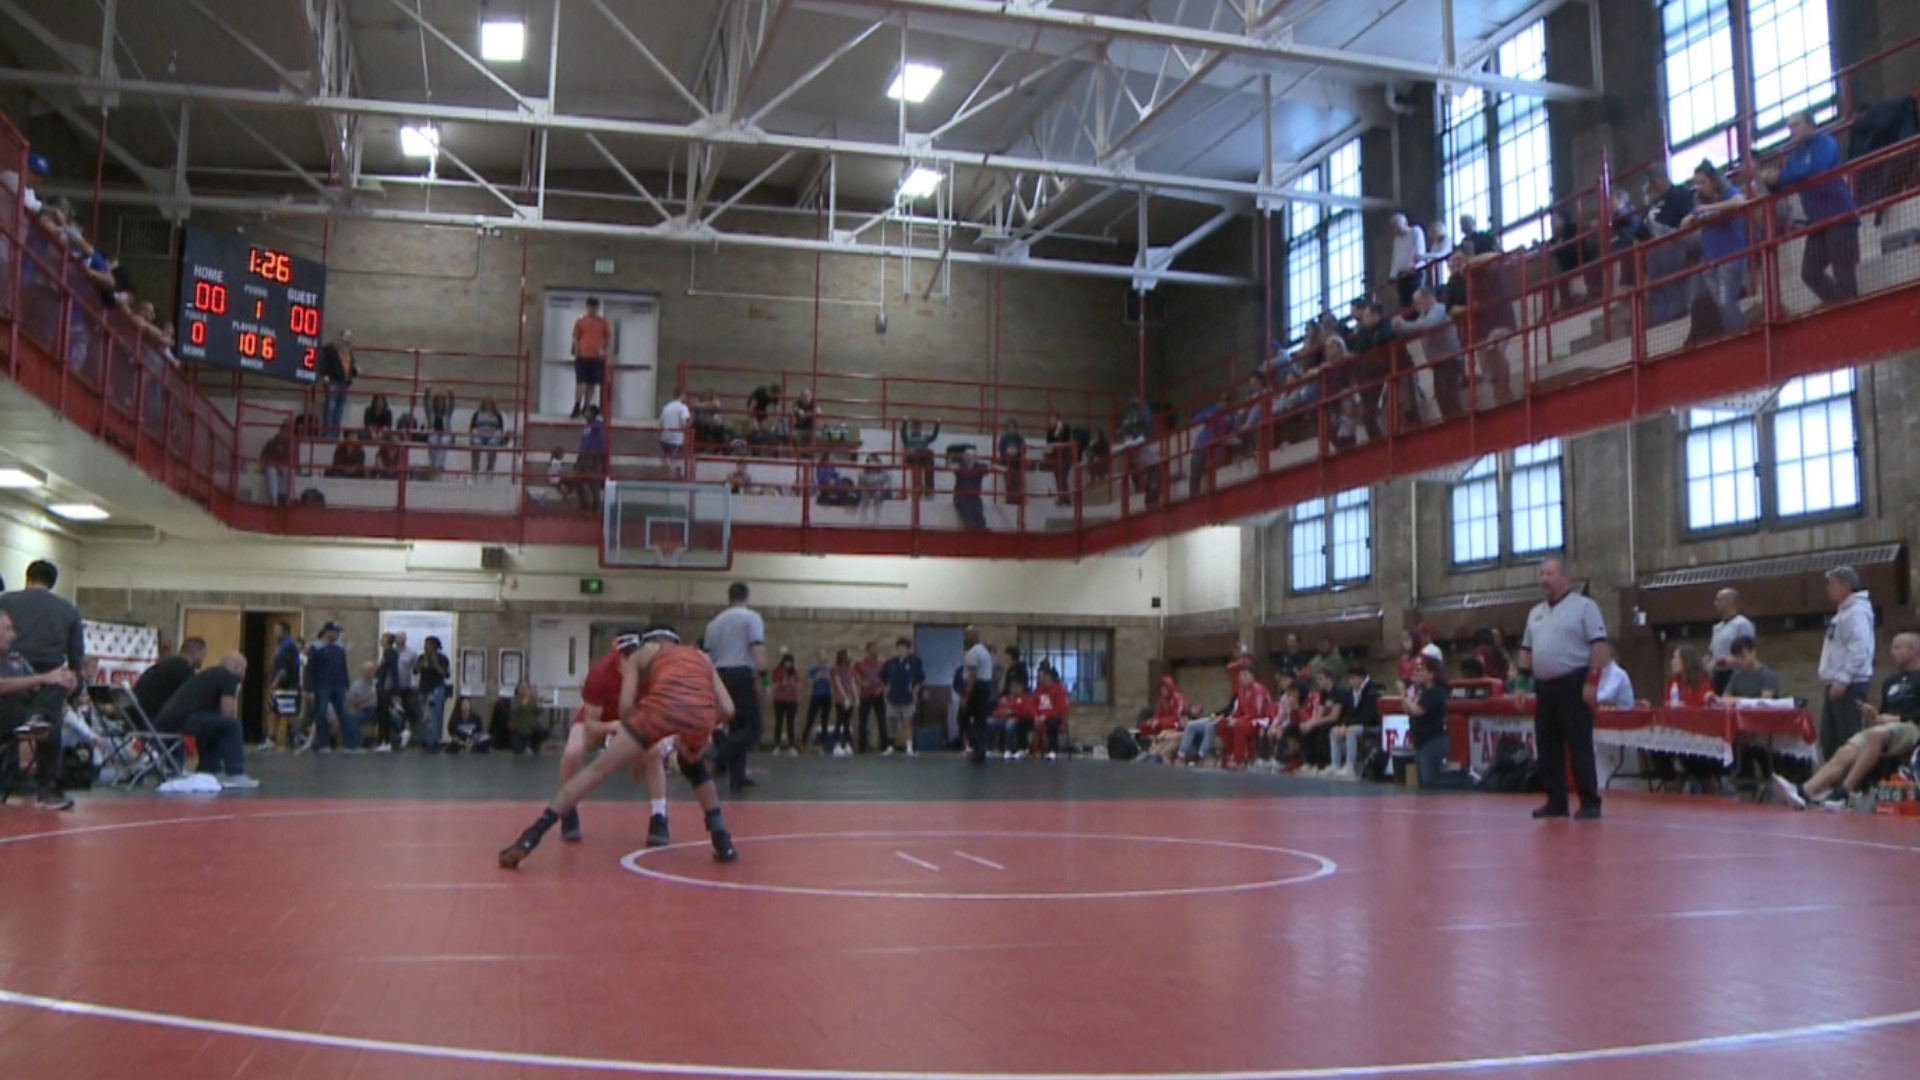 Twelve teams from across the state gathered at Denver East High School for the 12th-annual Colfax Smackdown.